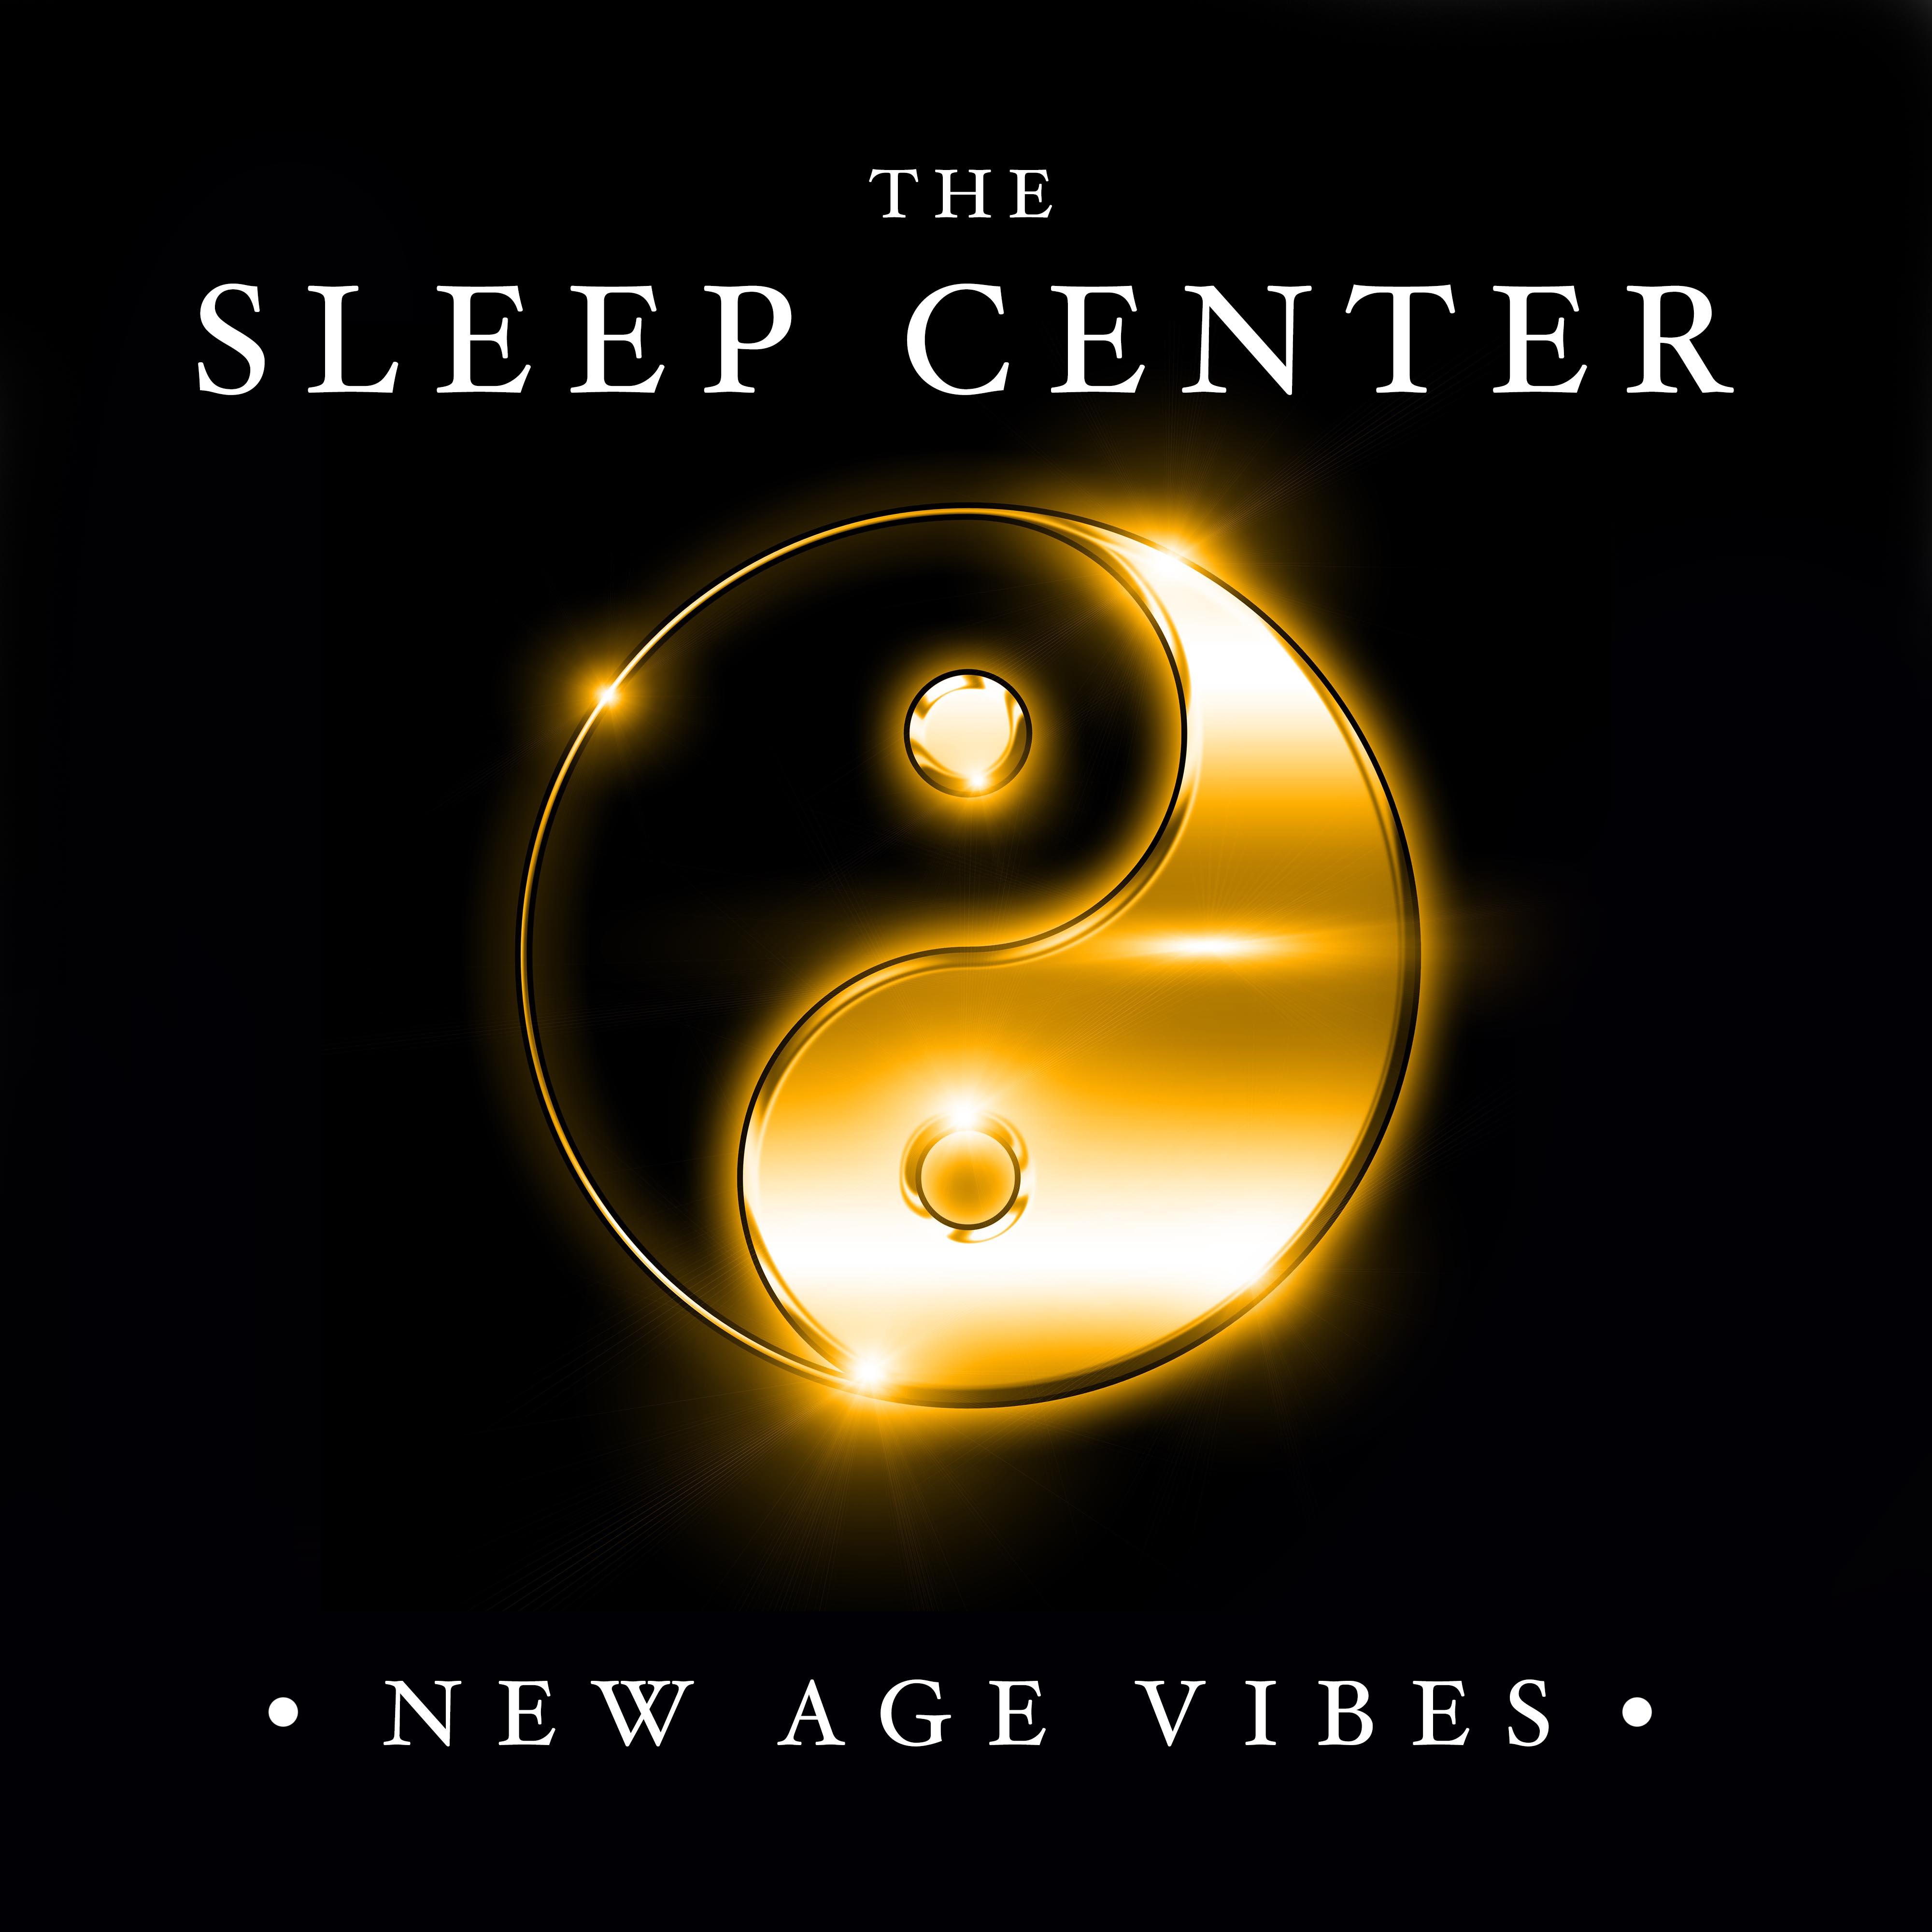 the Sleep Center - New Age Vibes with the Relaxing Sounds of Nature